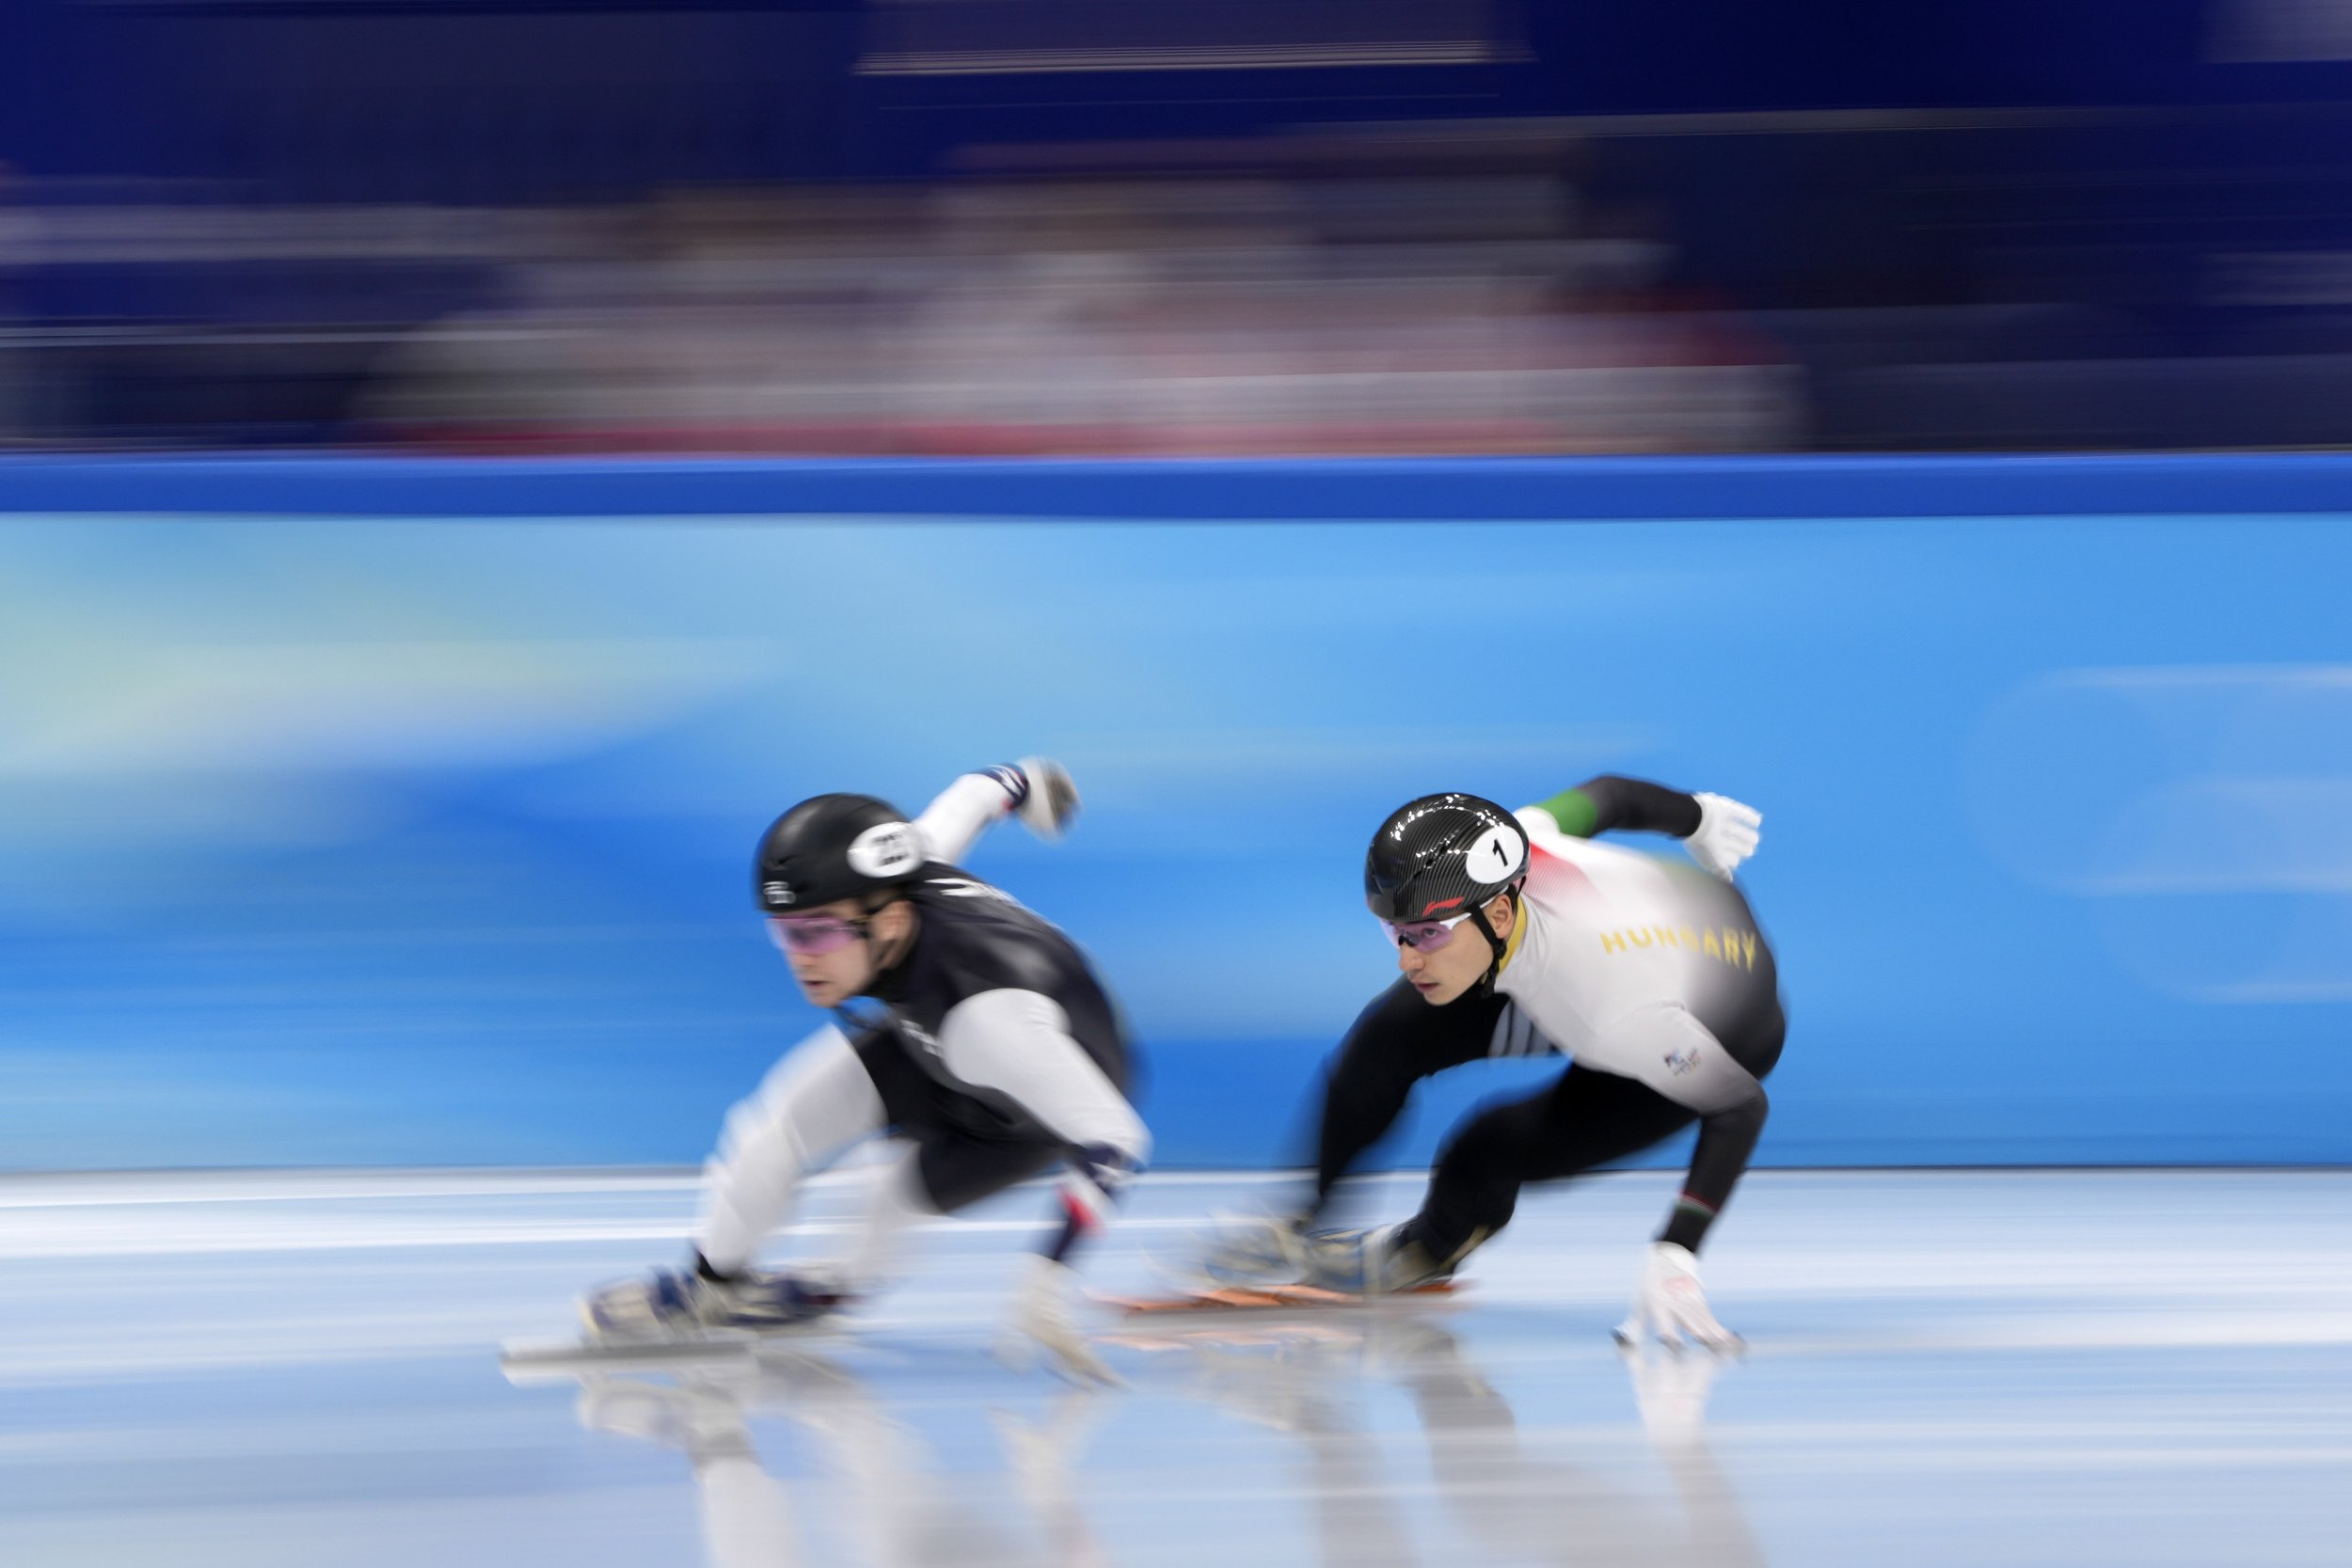  Andrew Heo, left, of the United States, and Liu Shaoang of Hungary race in the mixed team relay semifinal during the short track speedskating competition at the 2022 Winter Olympics, Saturday, Feb. 5, 2022, in Beijing. (AP Photo/Natacha Pisarenko) 